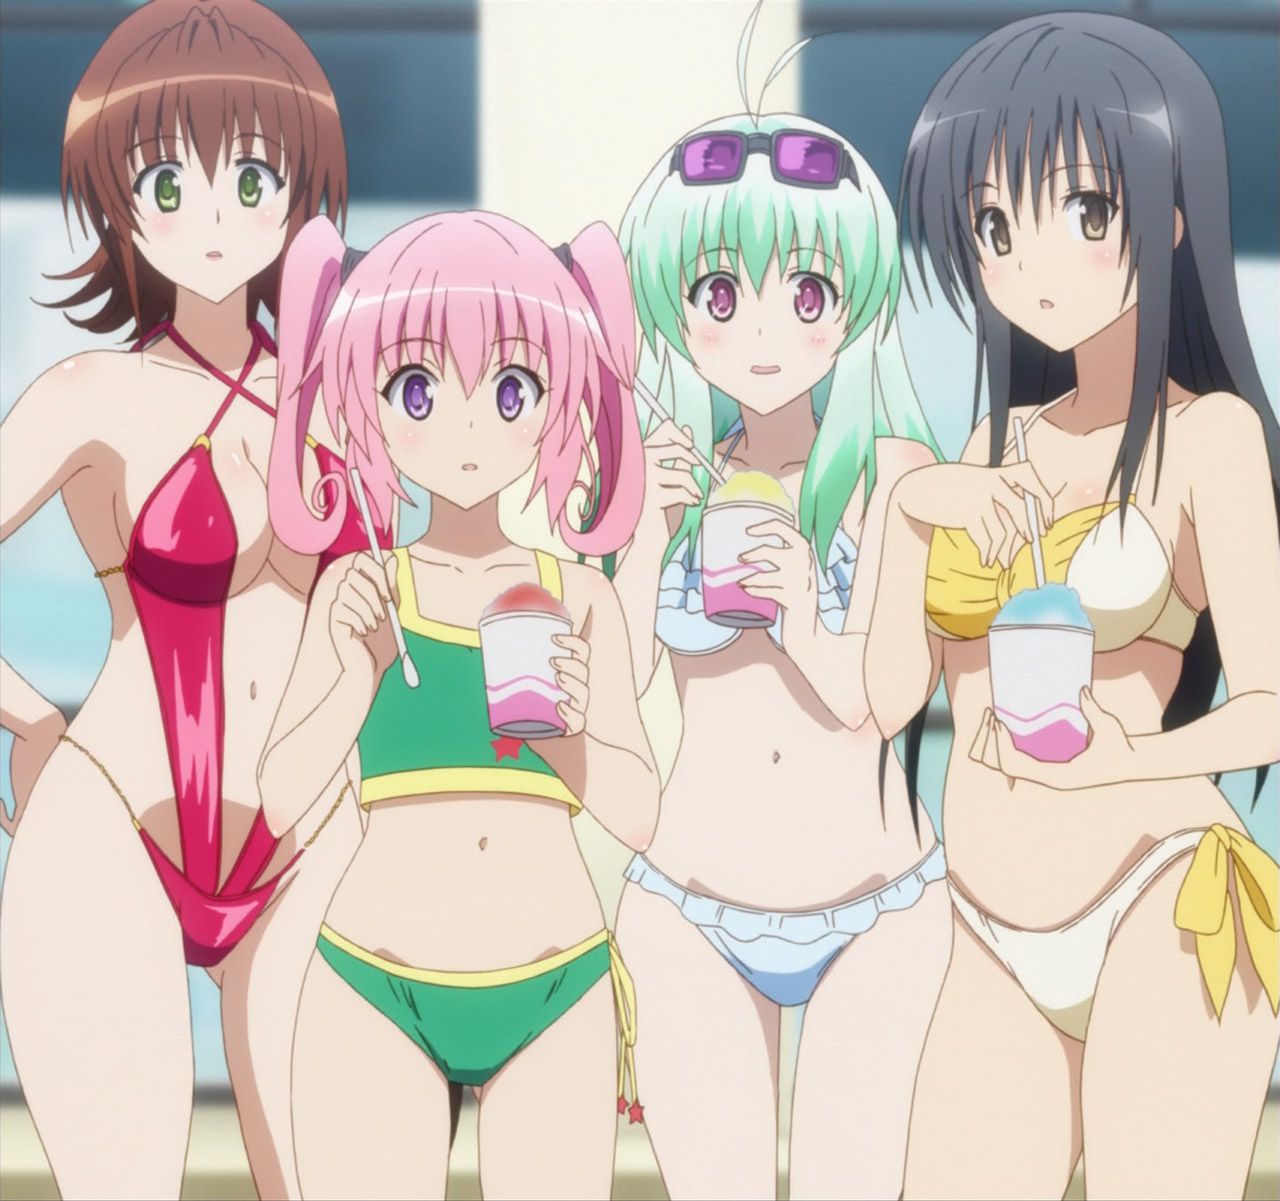 Refreshes the skin component for girl bikini pictures. Vol.10 10